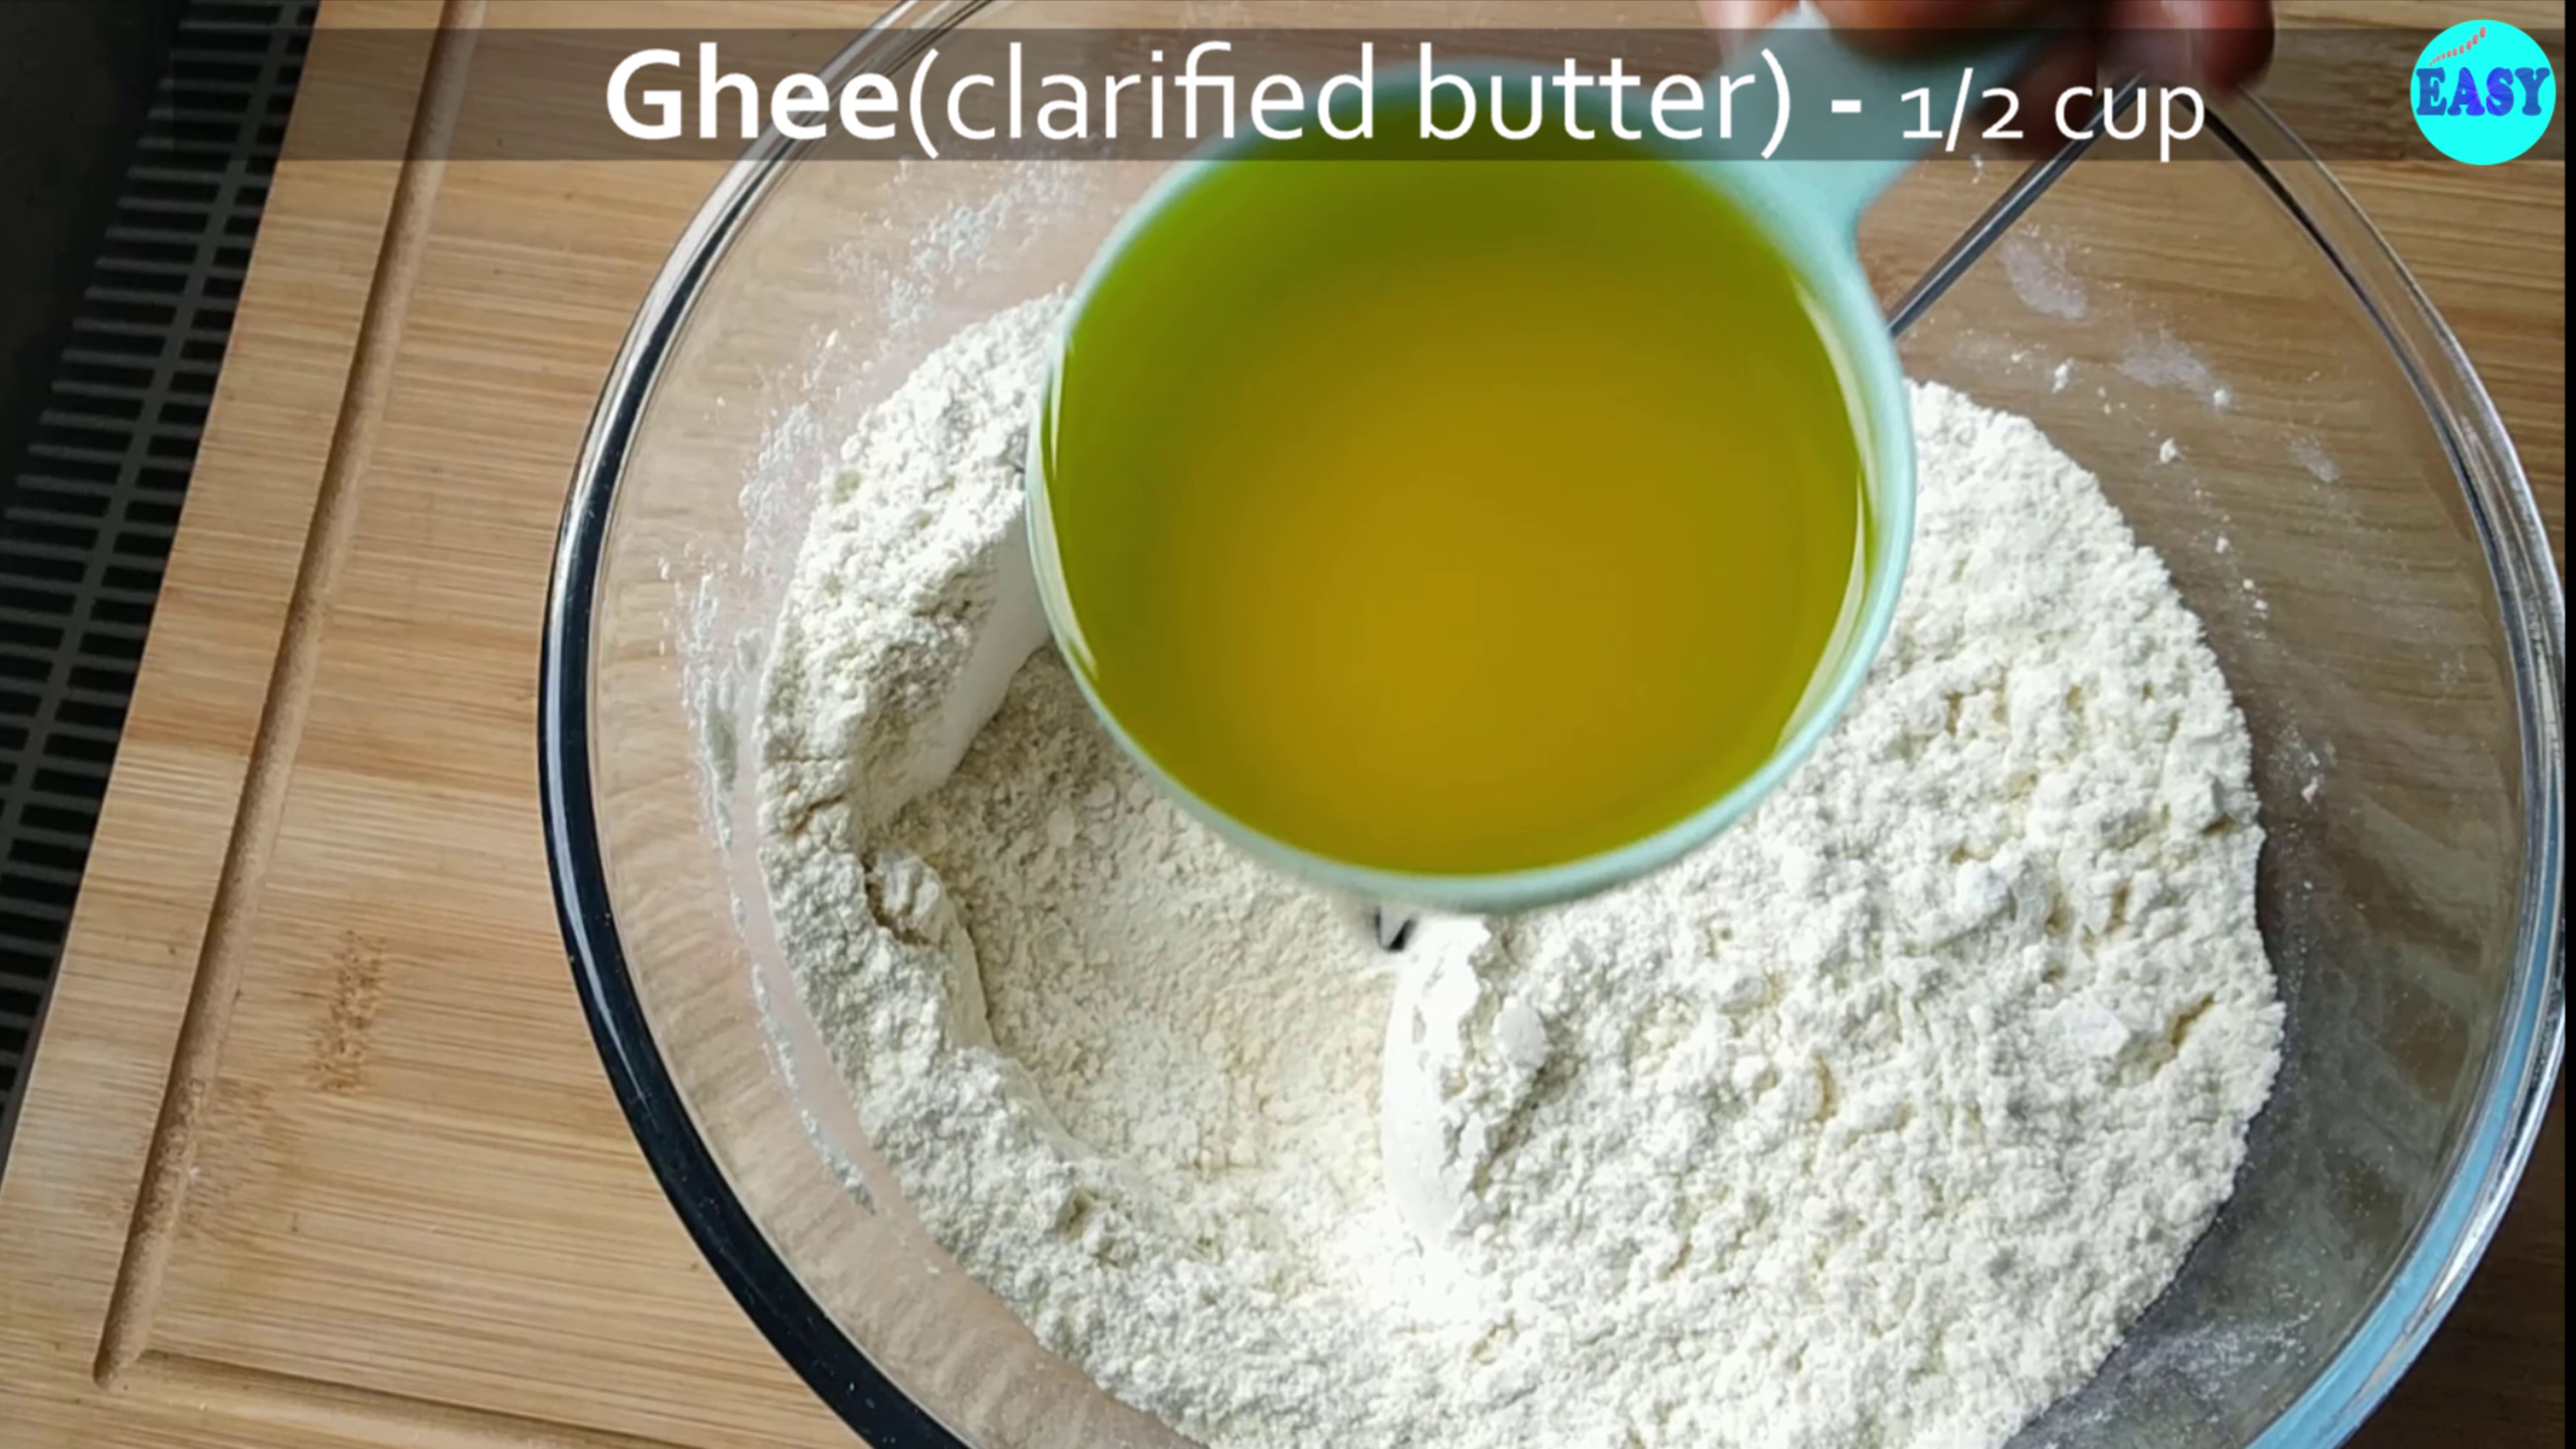 Step 3 - Add the ghee (clarified butter) to the flour mix and begin to mix with a spoon or spatula. Until its well blended.